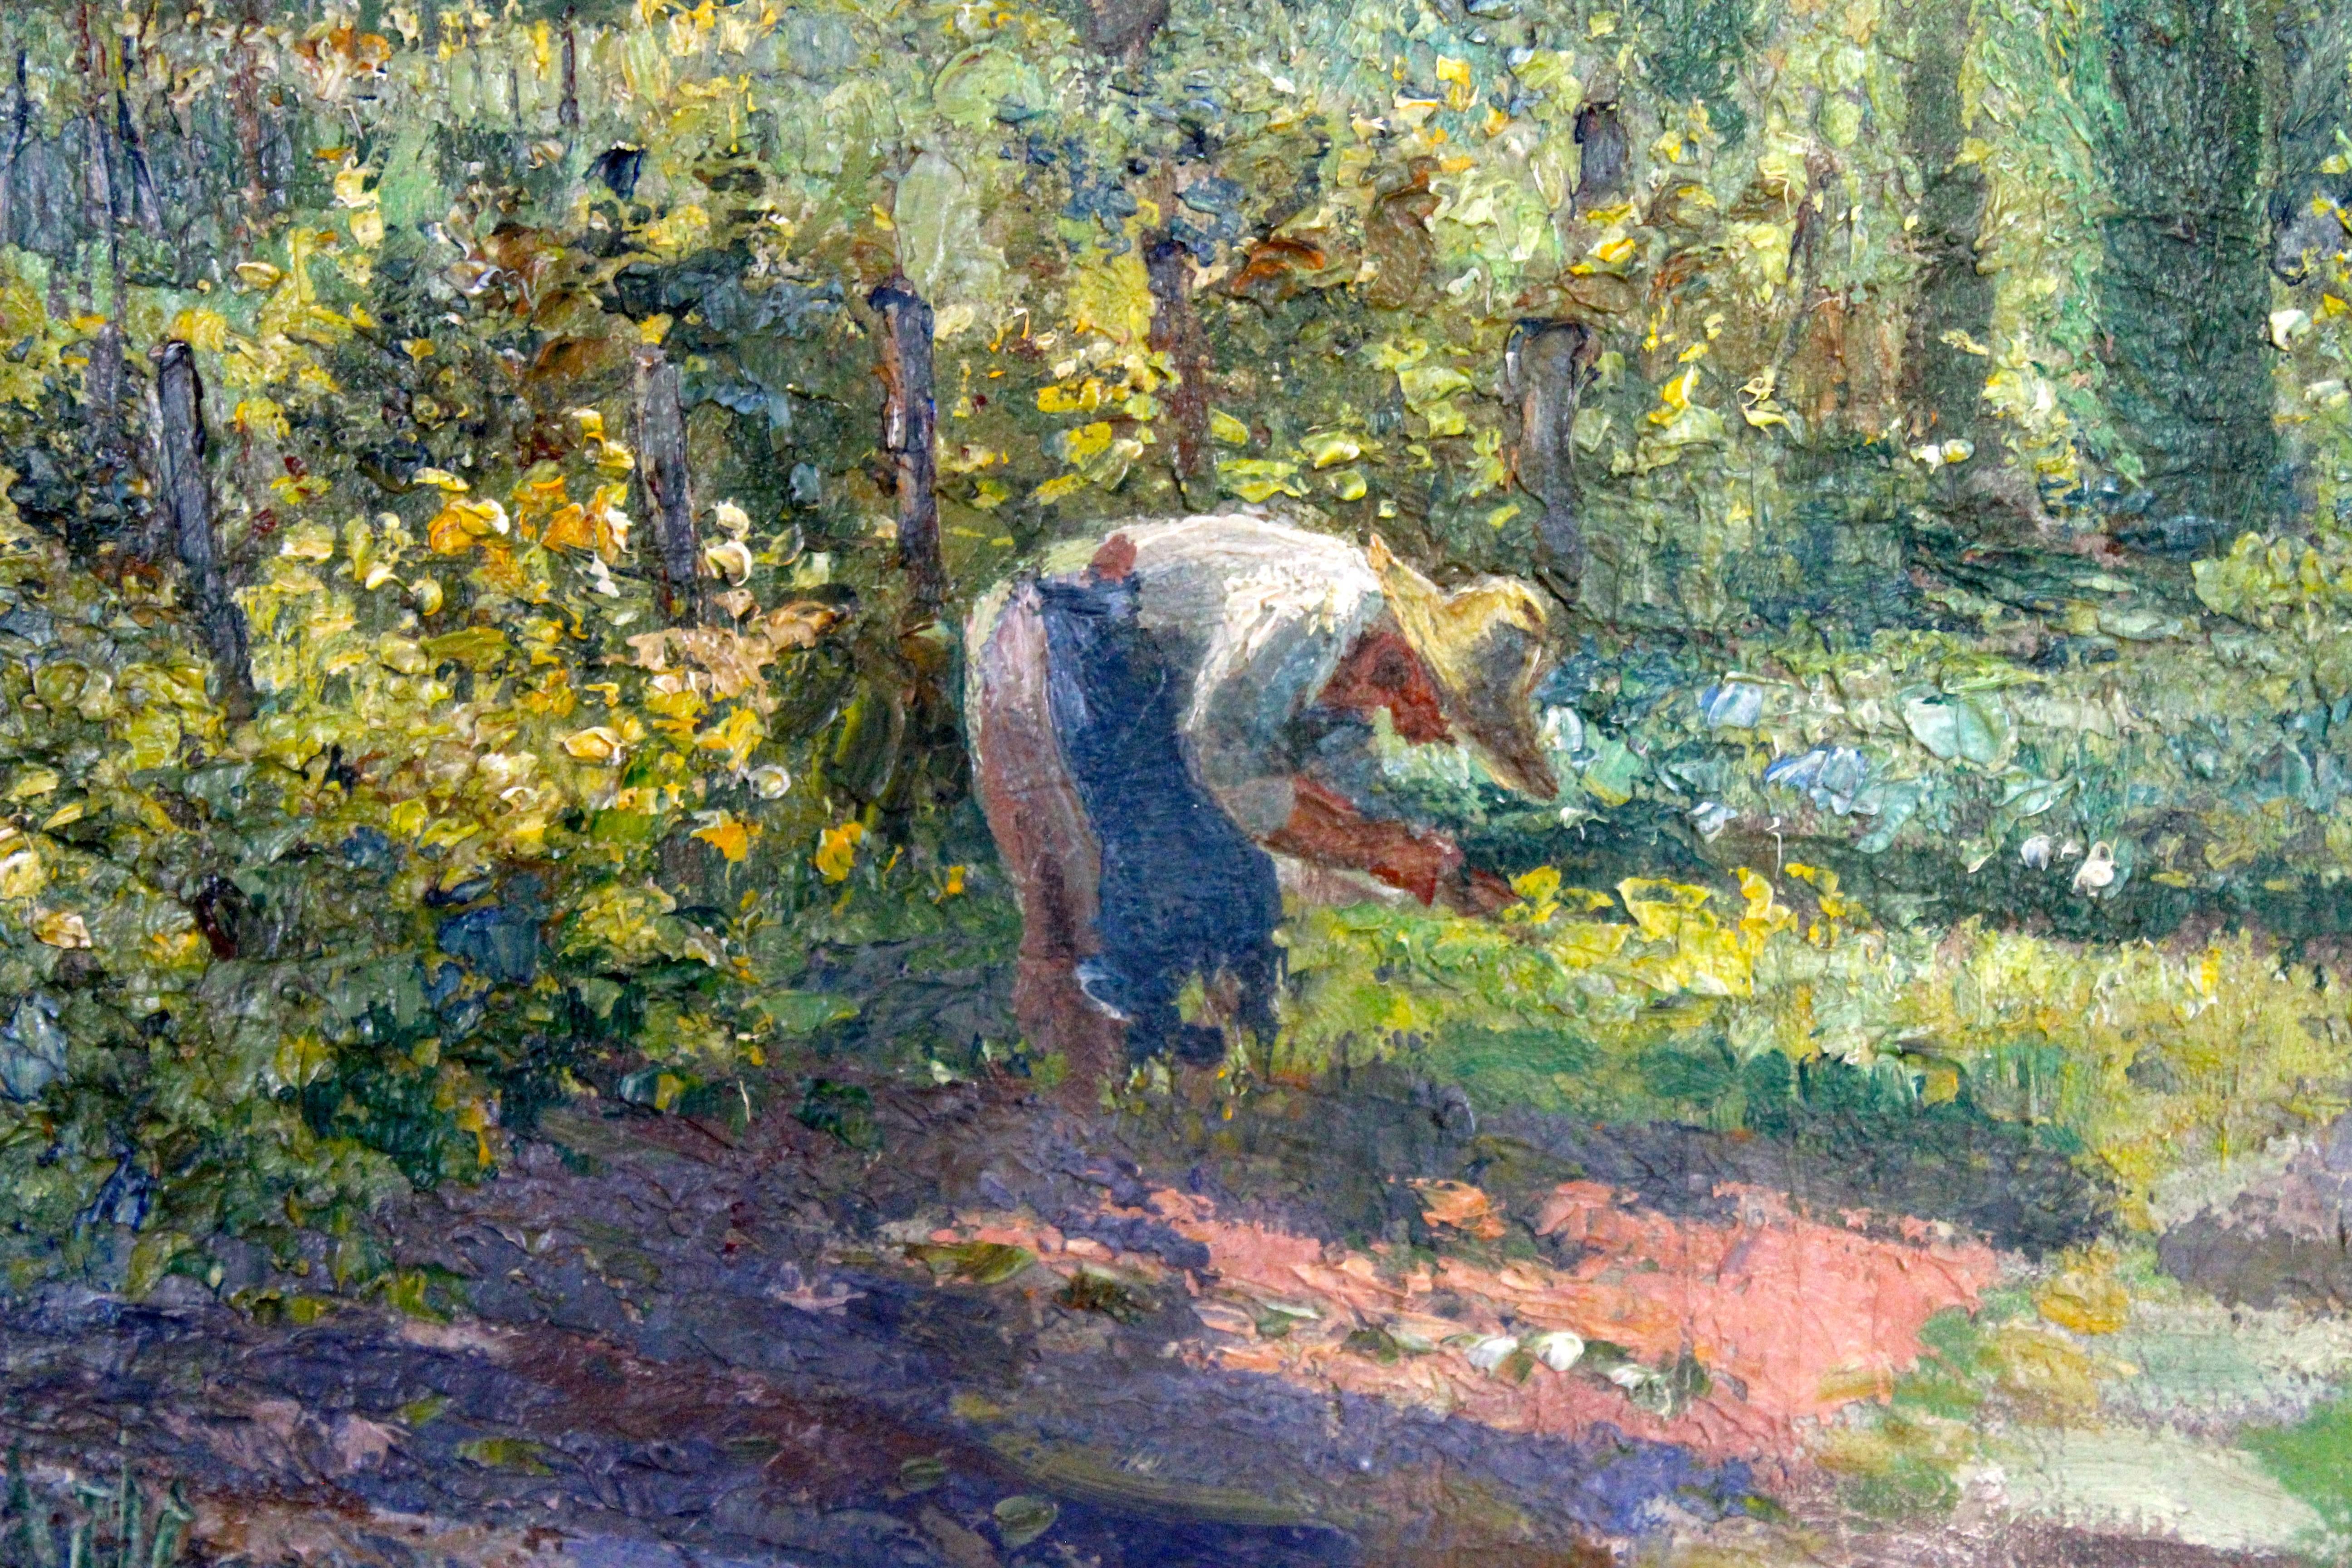 Impressionist painting of a villagegarden in the French countryside, signed and dated lower left 